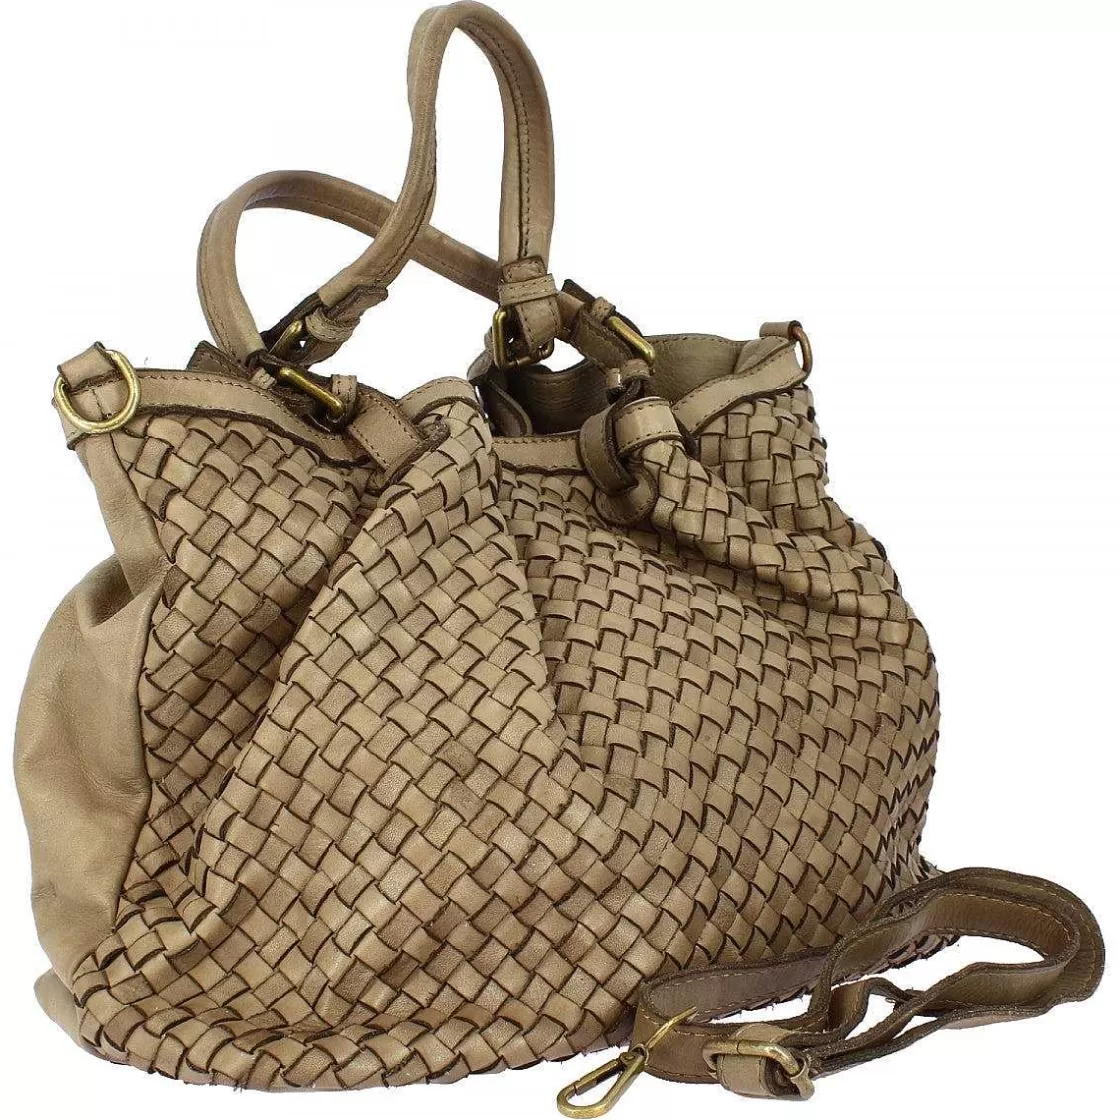 Leonardo Petrarca Women'S Bag Handmade In Taupe Woven Leather With Shoulder Strap Sale